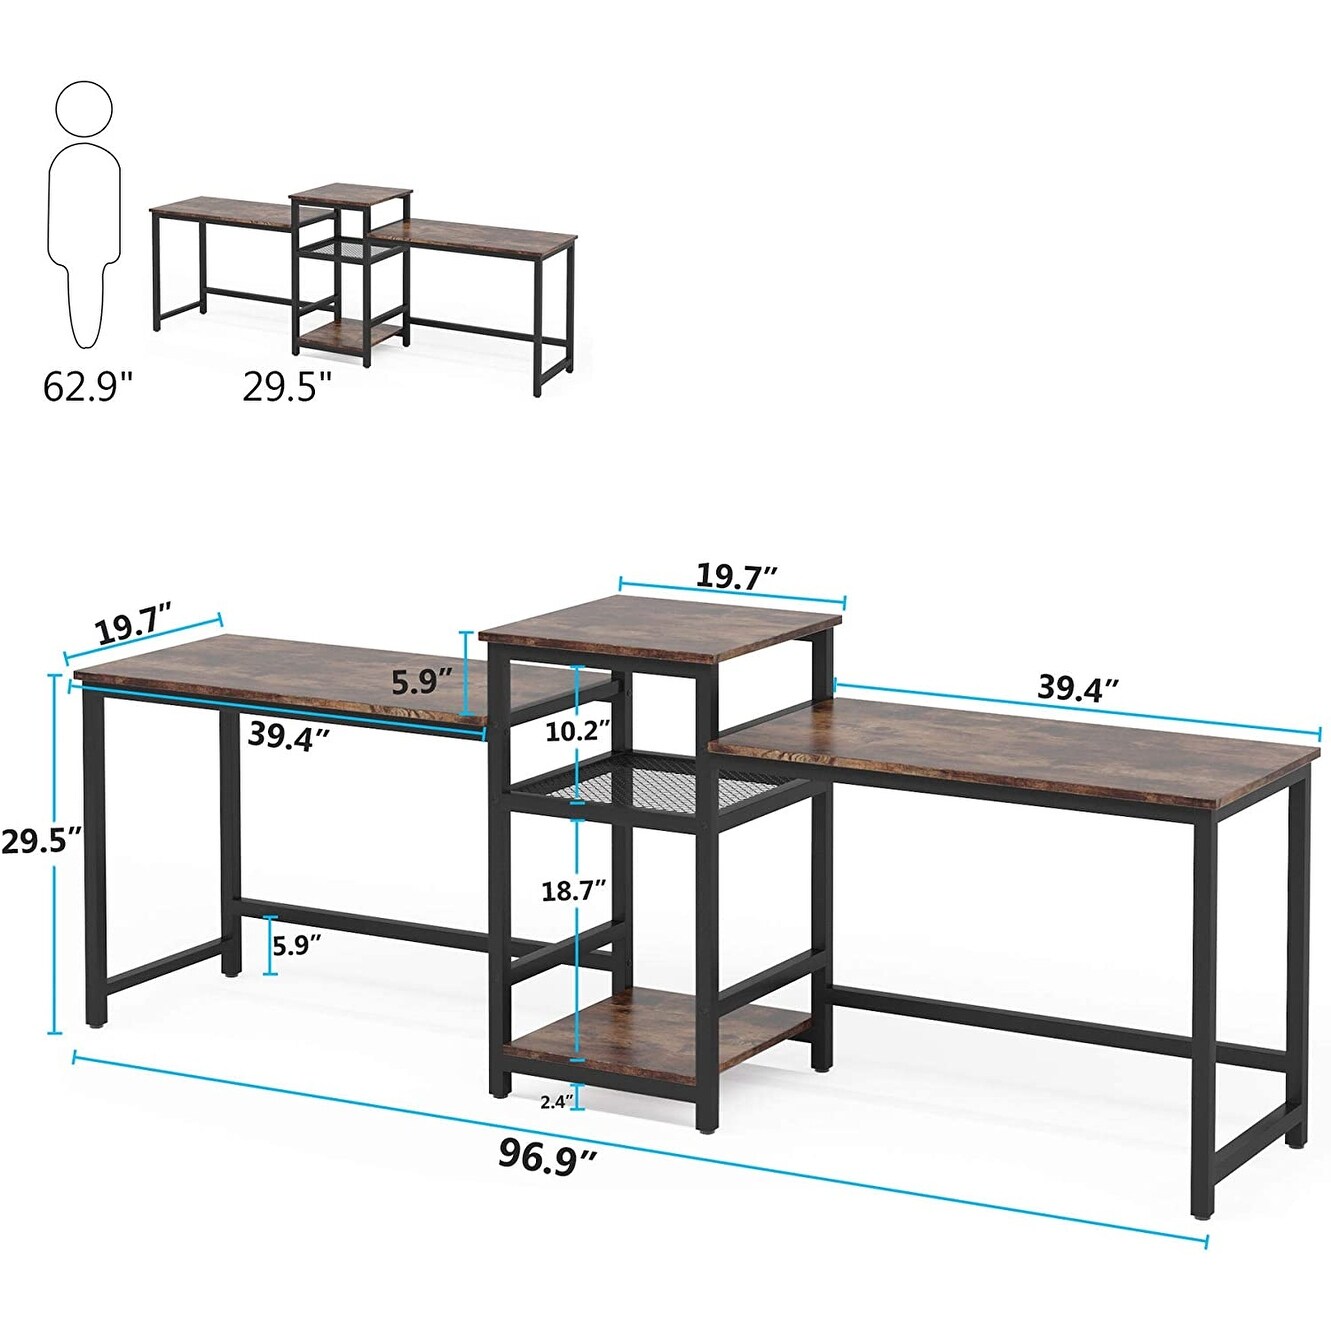 https://ak1.ostkcdn.com/images/products/is/images/direct/bfac9db9ffeec010a90309c09f7603bbb5ac53cc/96.9%22-Two-Person-Desk-with-Shelves%2C-Extra-Long-Double-Computer-Desk.jpg